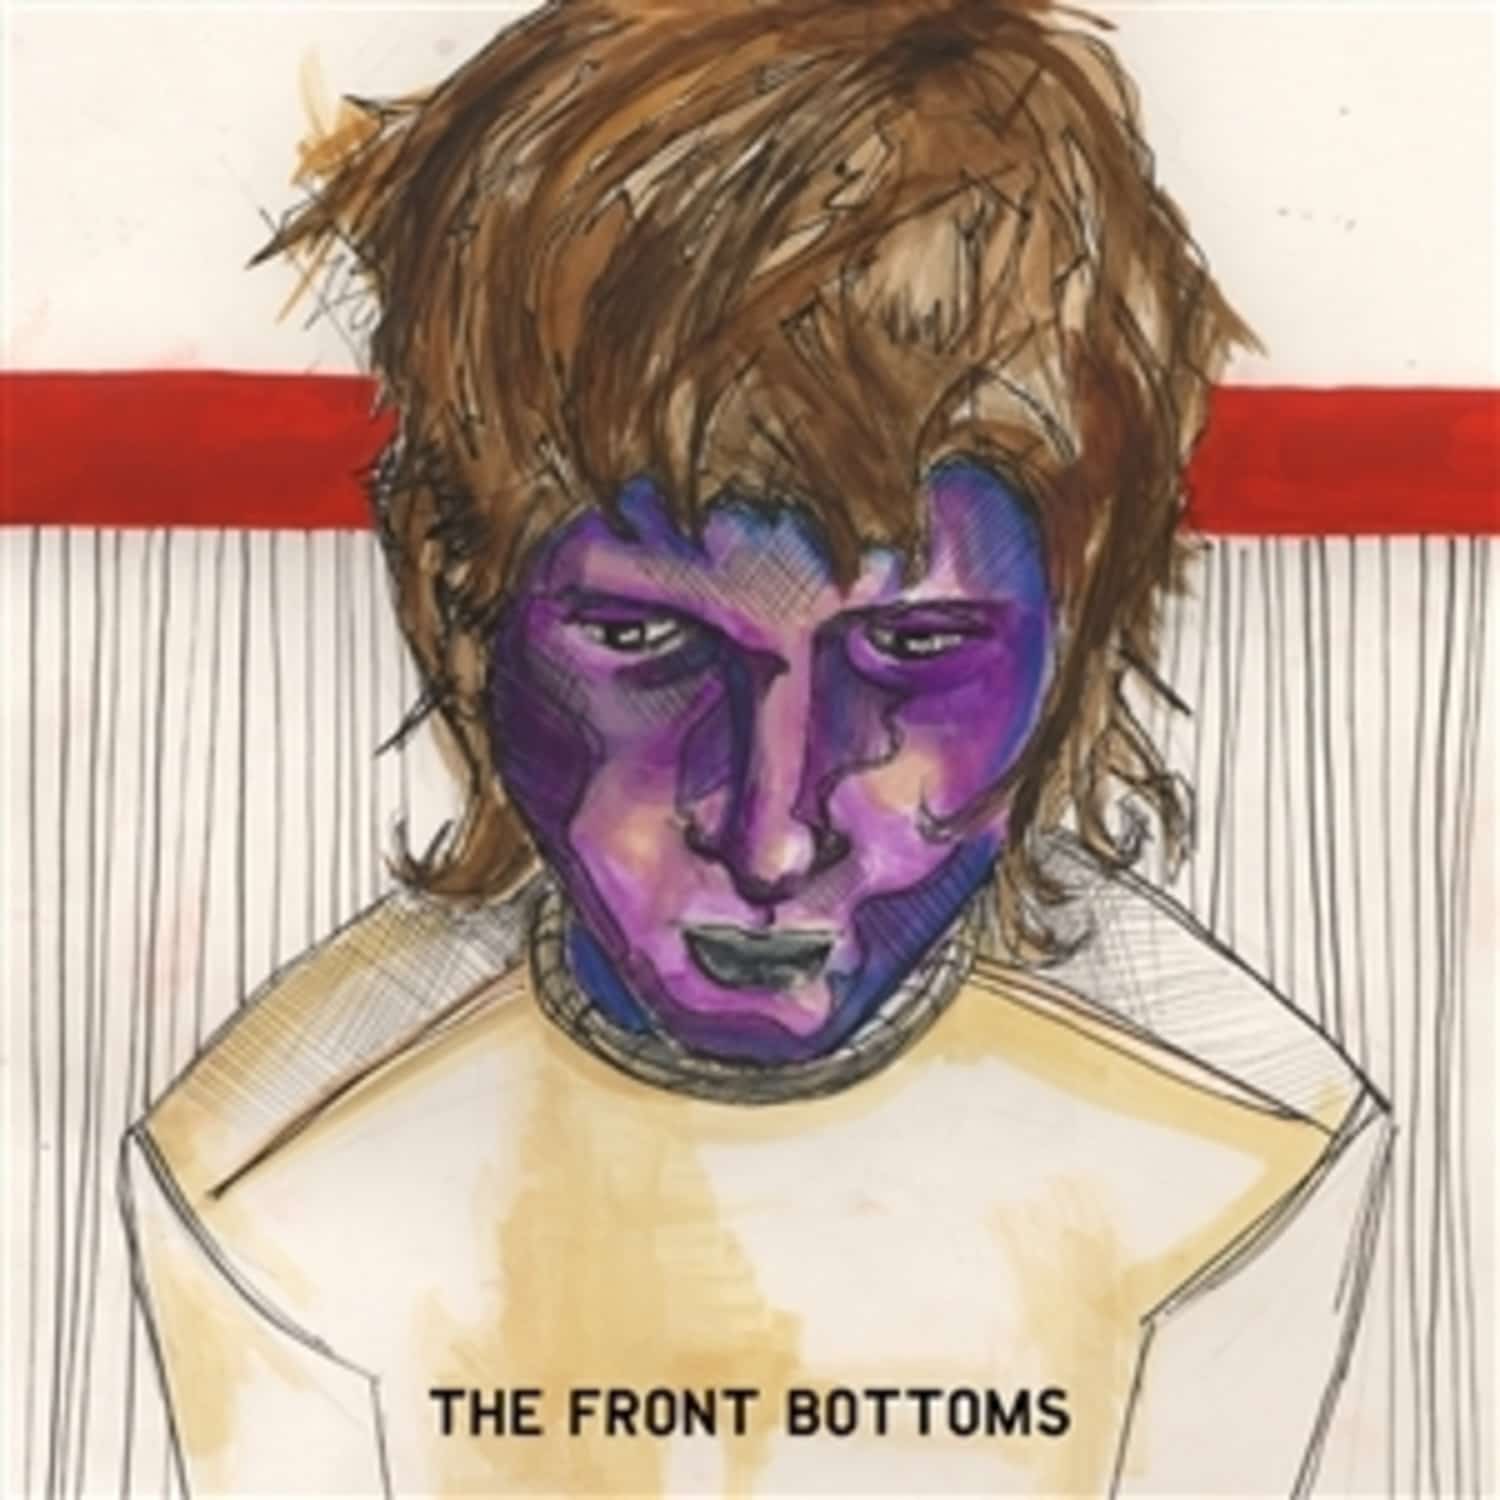  The Front Bottoms - THE FRONT BOTTOMS 